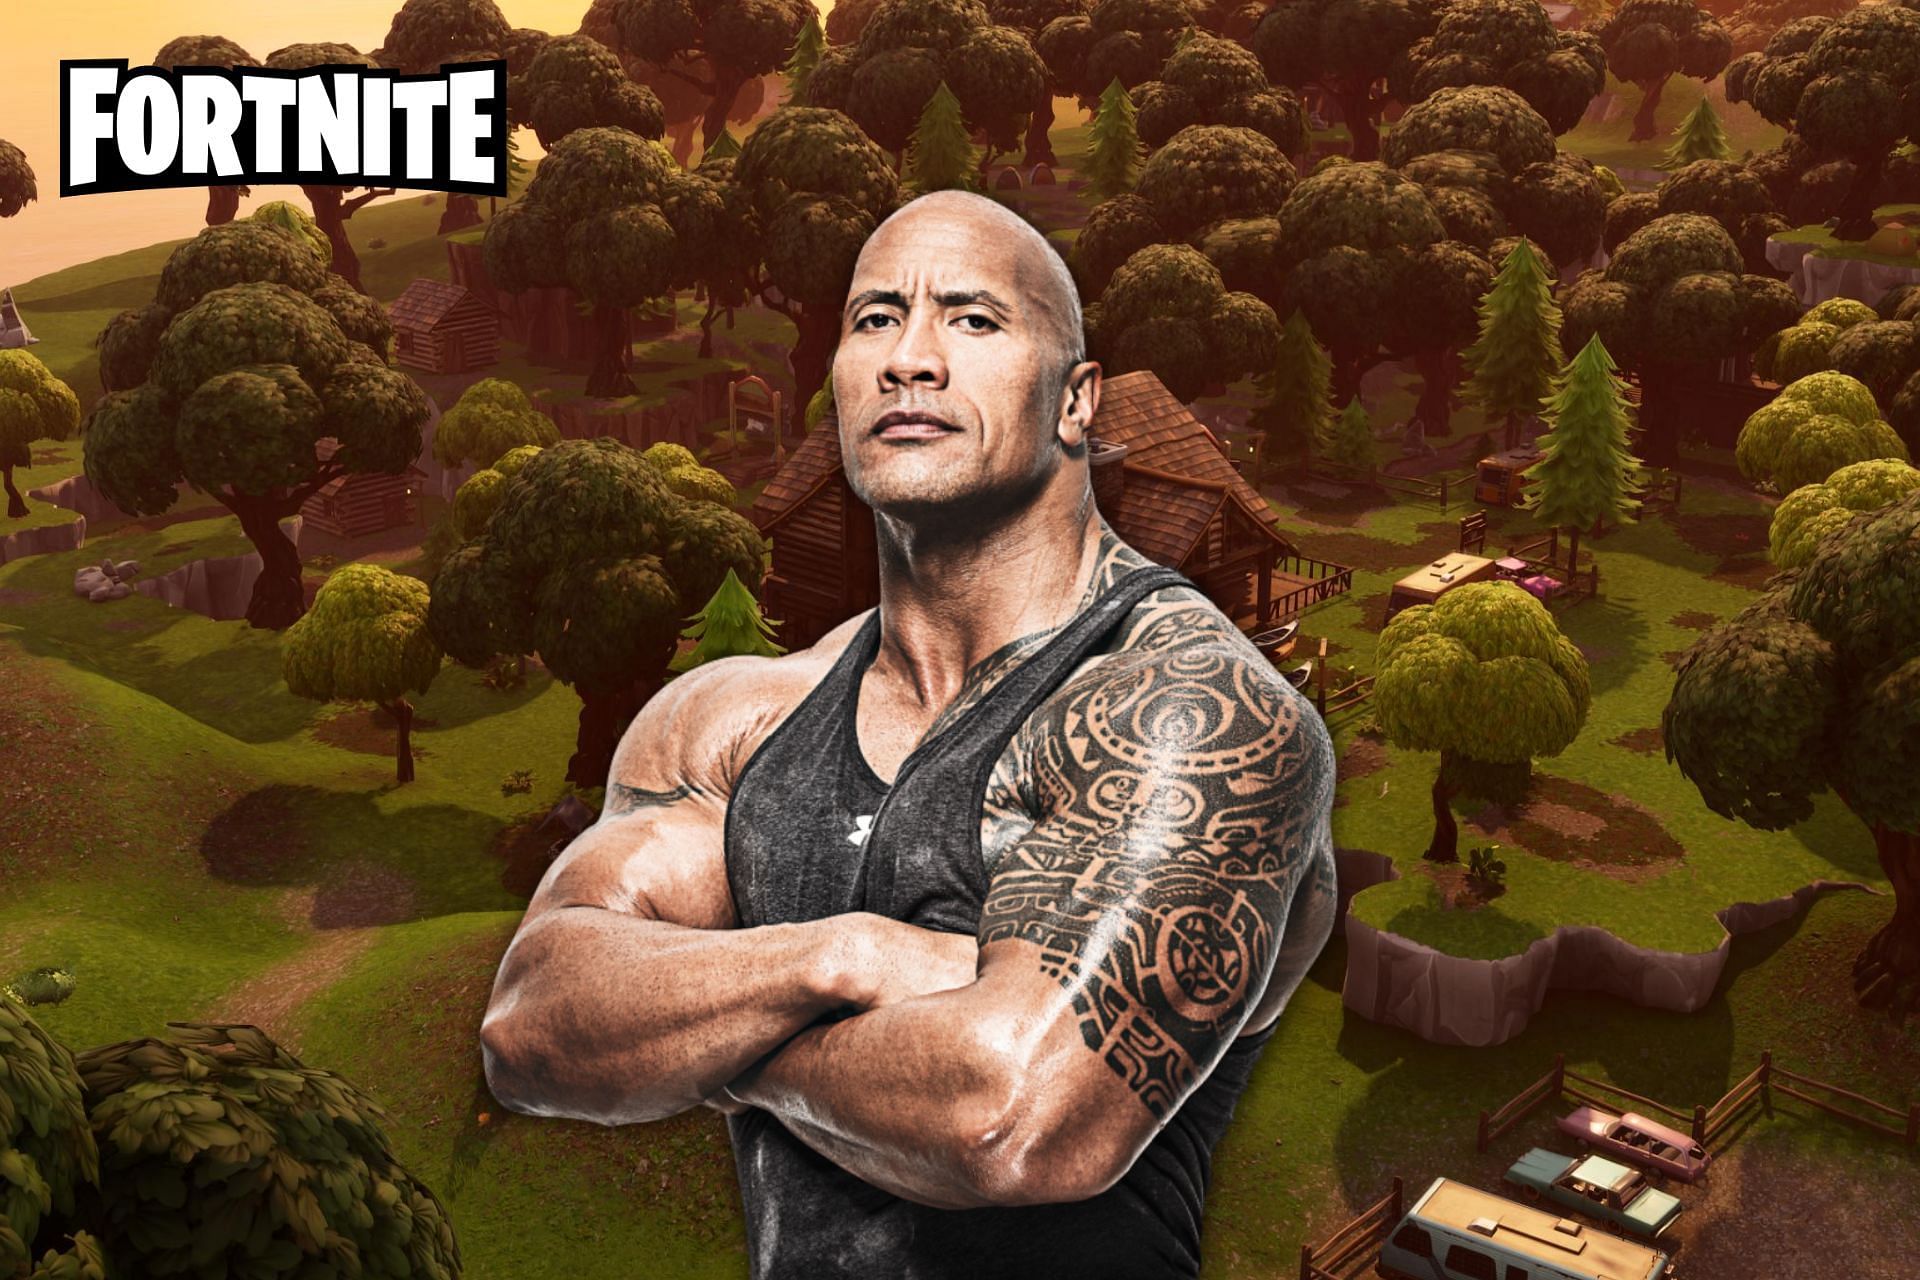 The Rock might be the next big icon pack character in Fortnite Season 8 (Image via Sportskeeda)